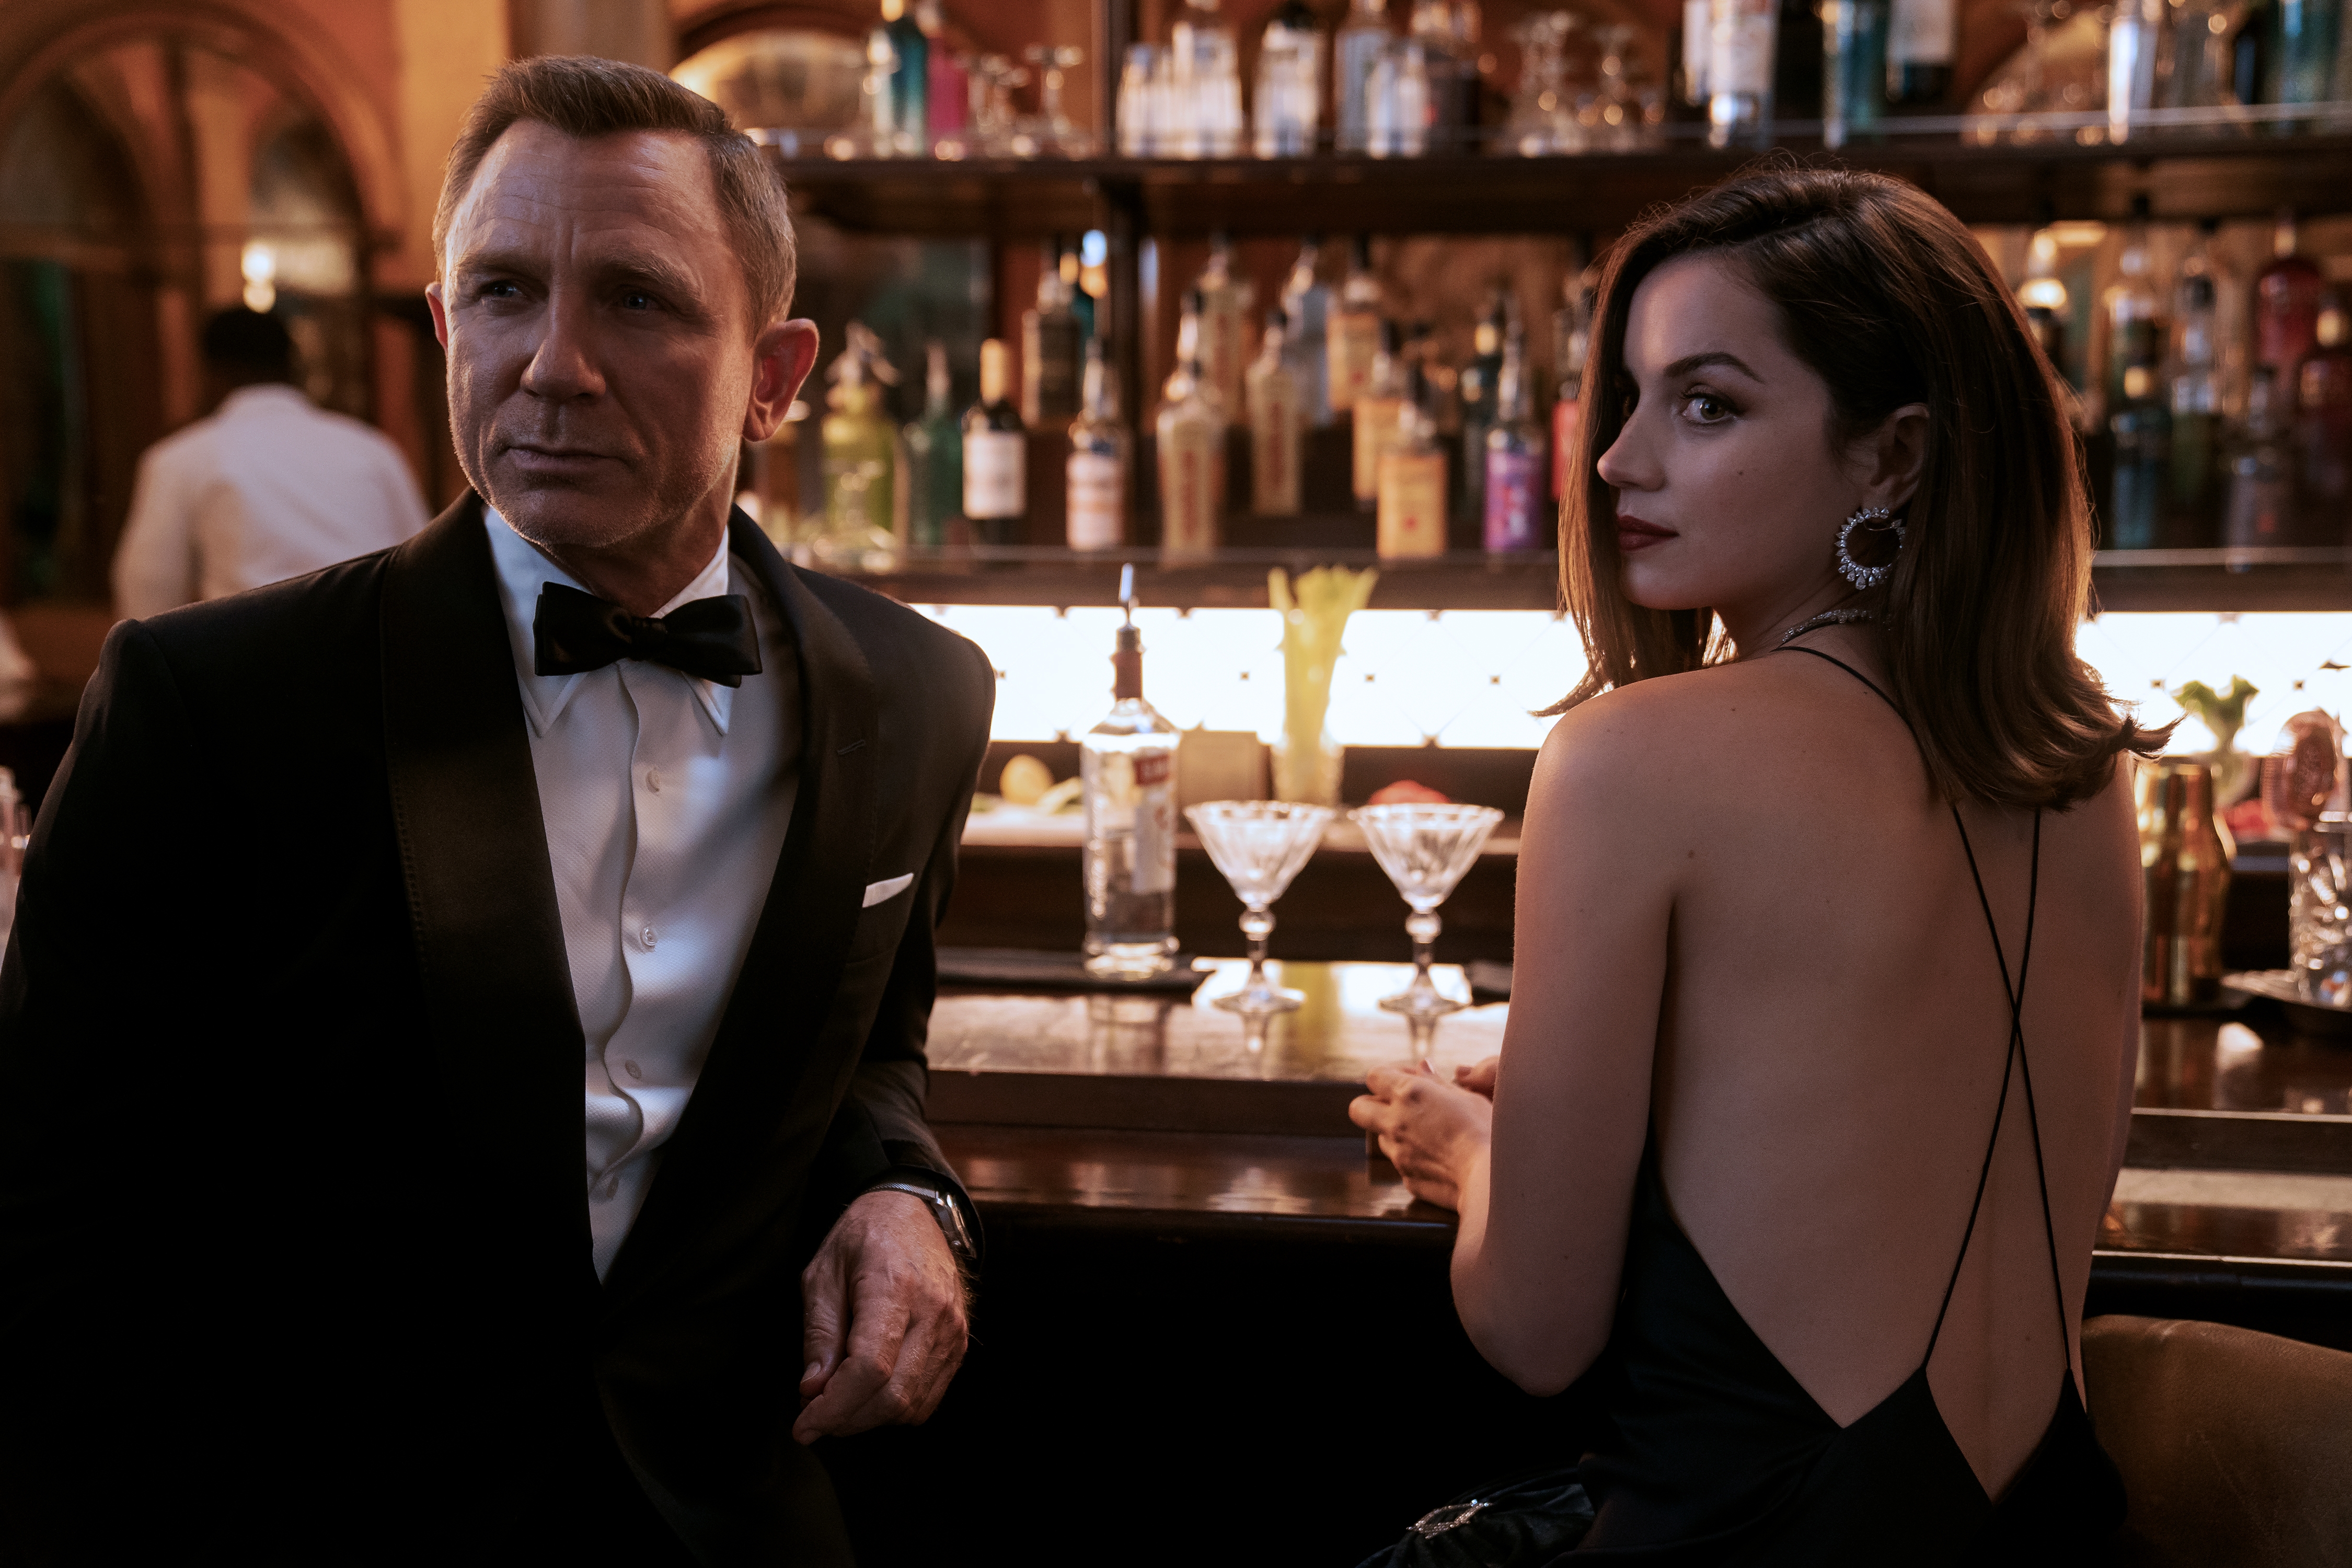 No Time To Die is a sentimental, unsatisfying end to the Daniel Craig era of James Bond